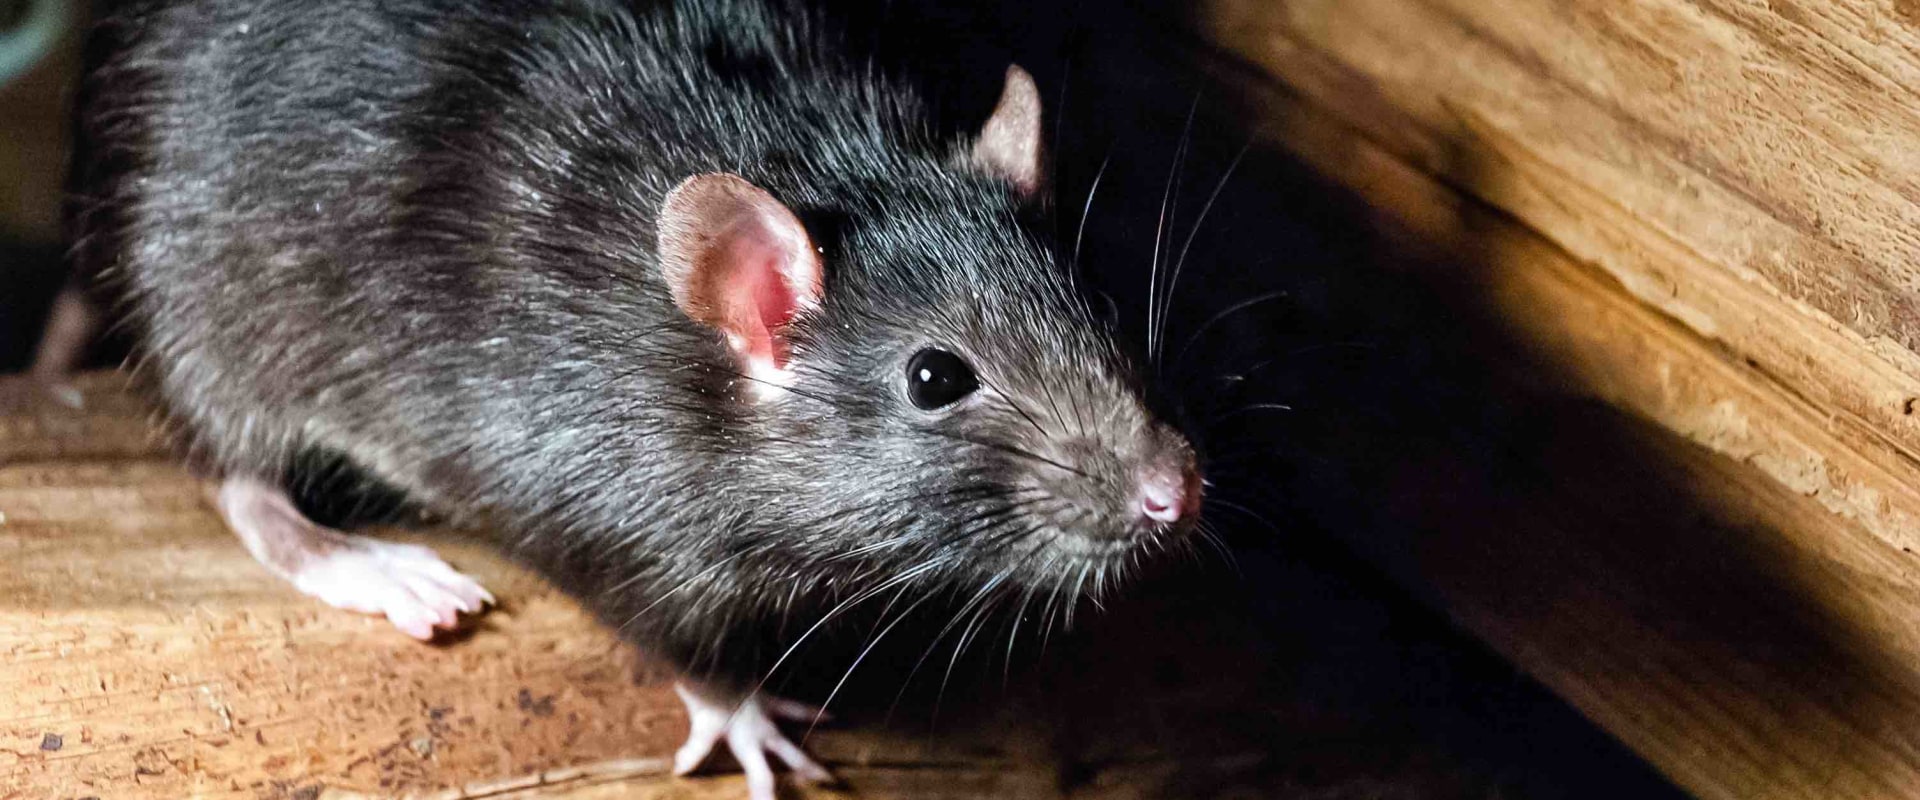 What do you need to control rodents and other pests?